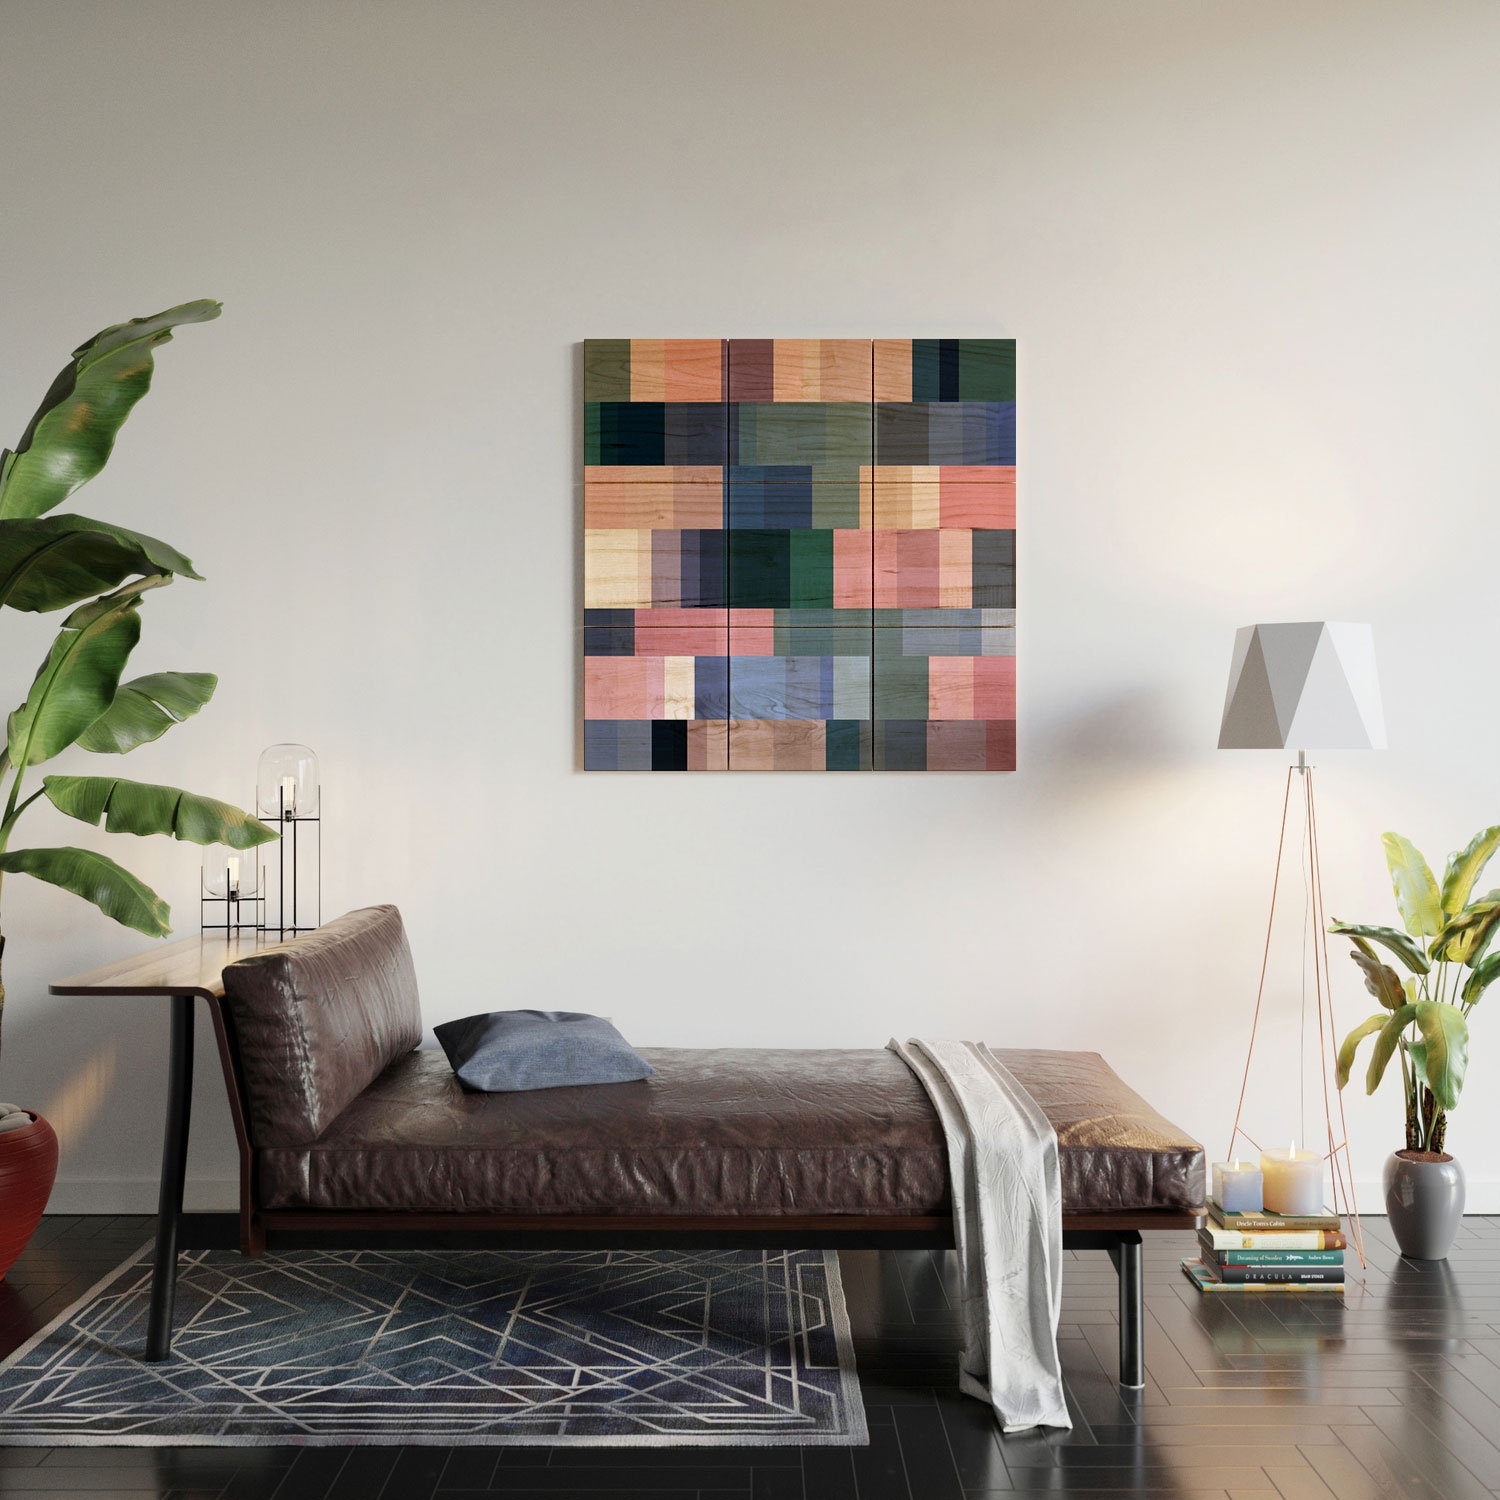 Nordic Combination 30 A by Mareike Boehmer - Wood Wall Mural3' X 3' (Nine 12" Wood Squares) - Image 1